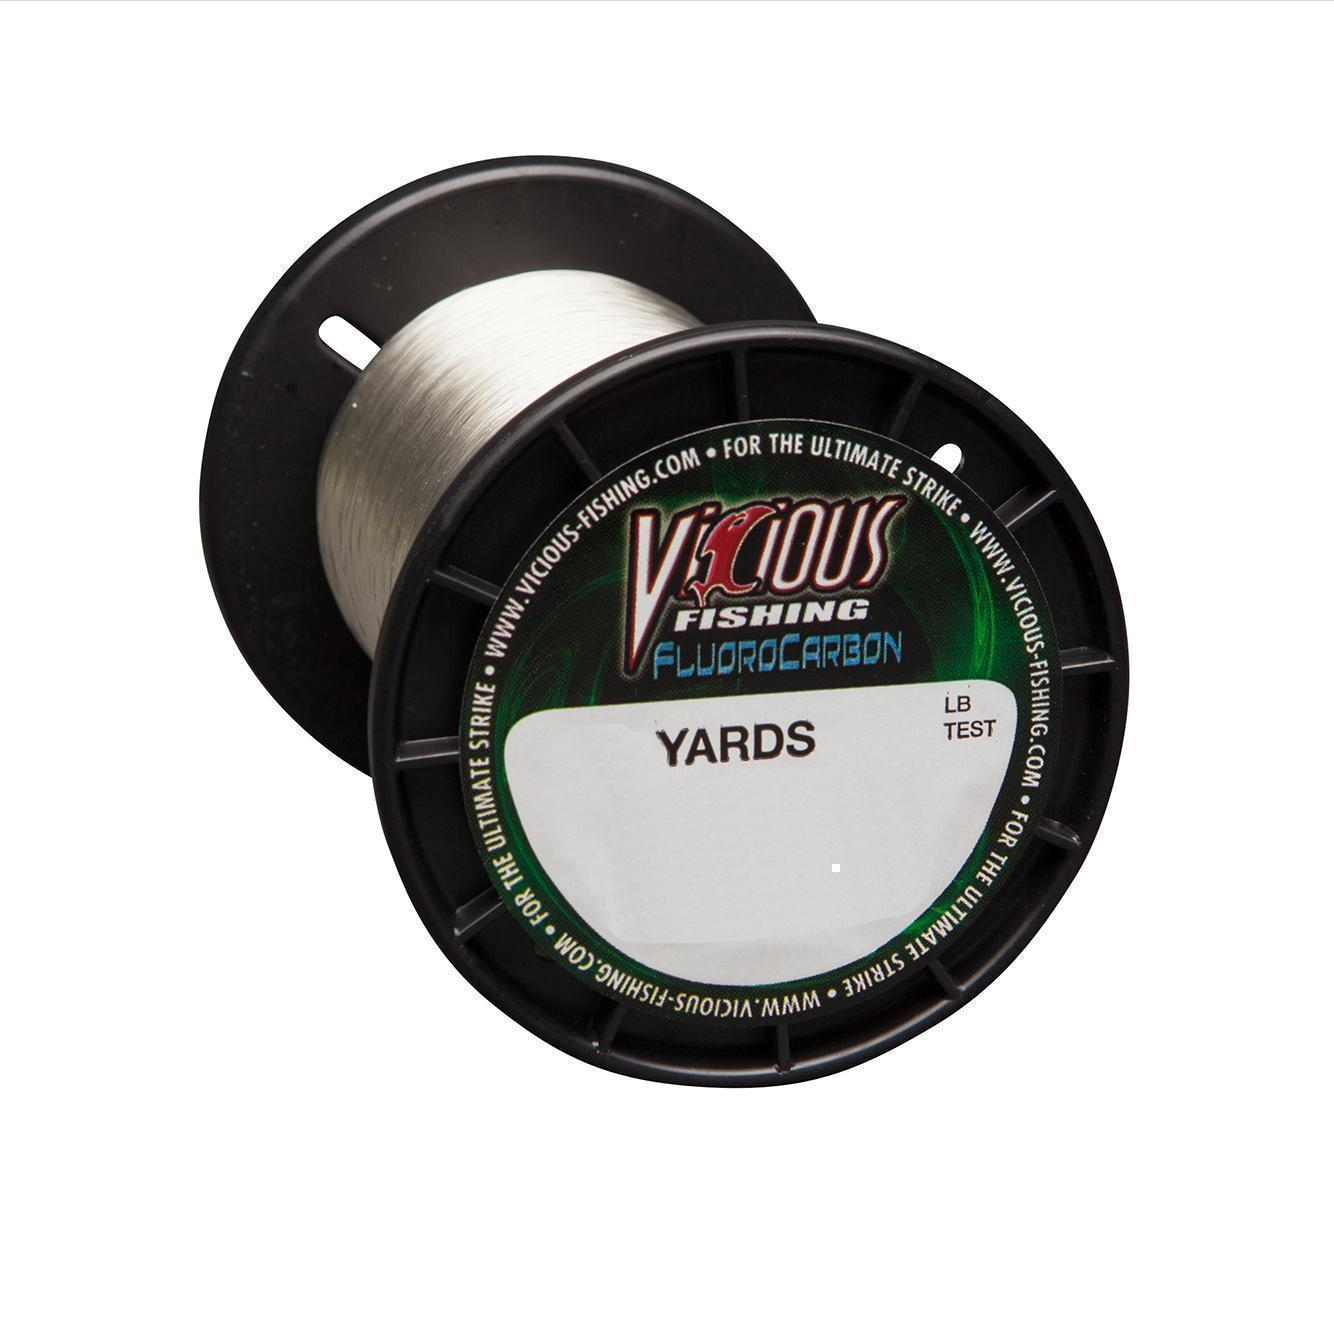 Braided Fishing Line 330 Yards 6-100 LB Super Strong 4 Strands